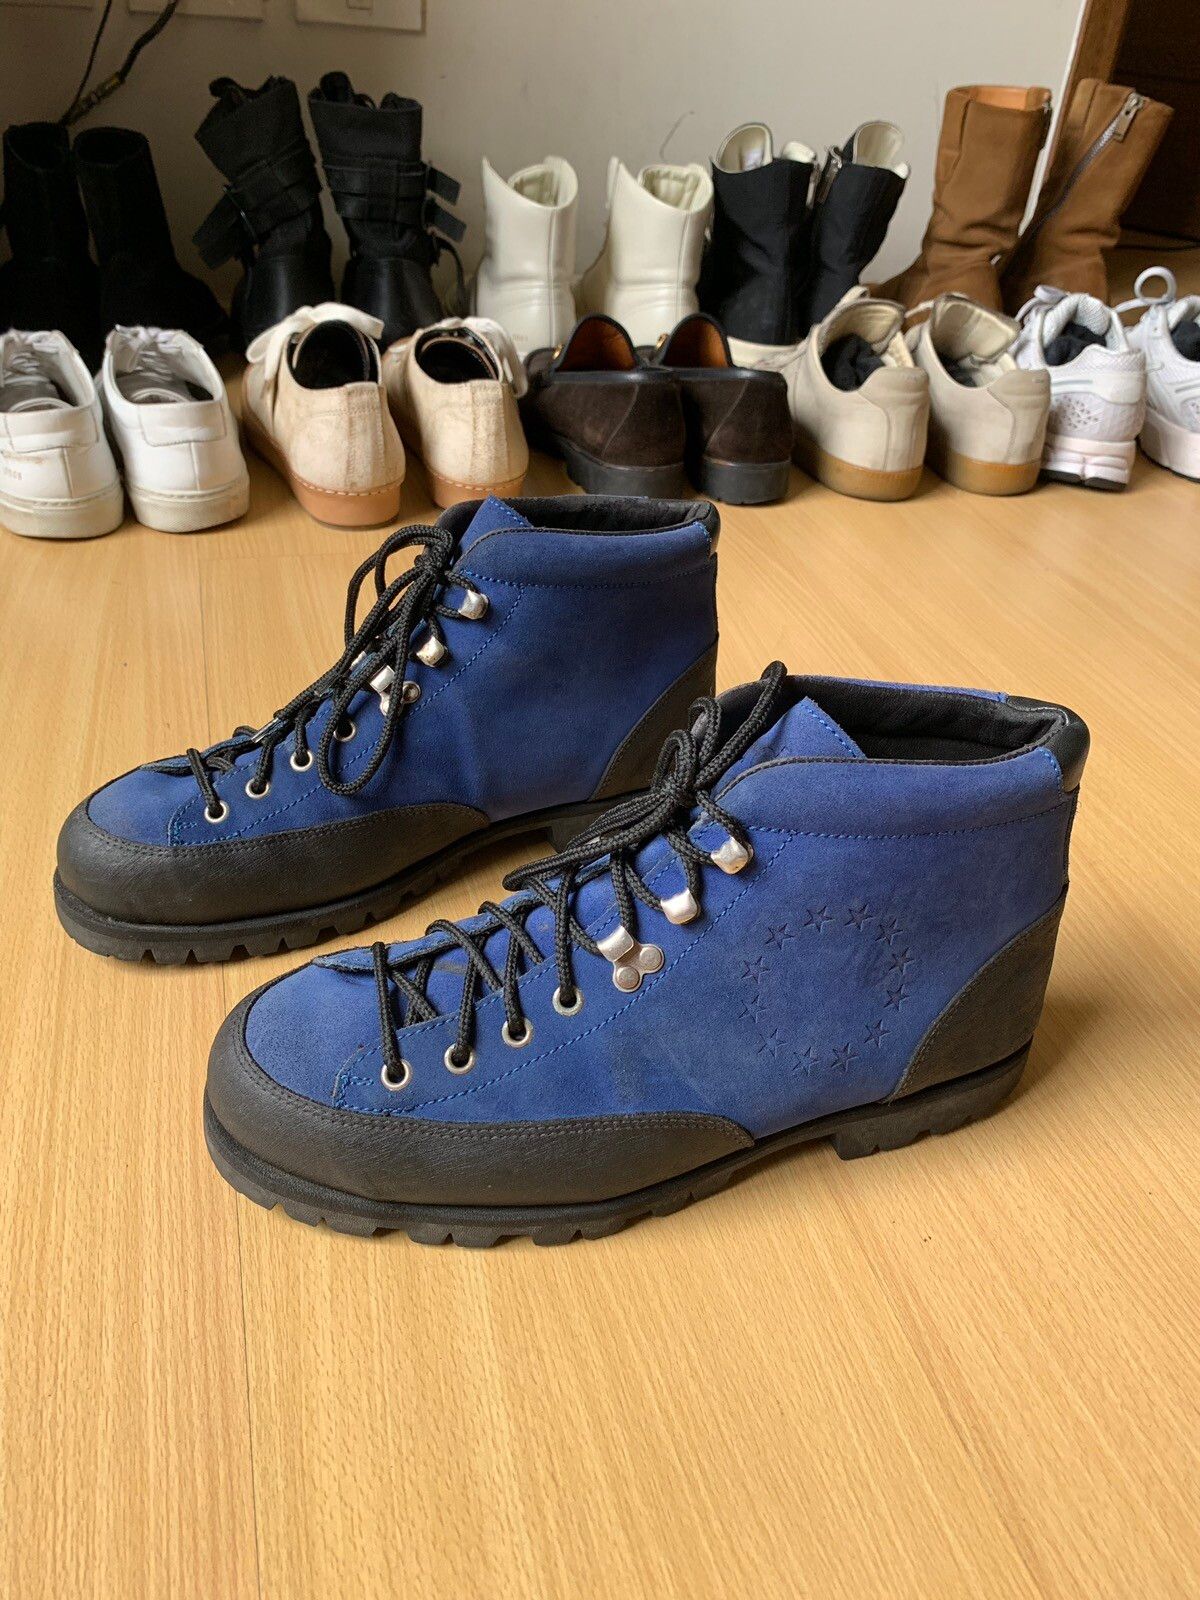 Paraboot Yosemite hiking boots Size US 10 / EU 43 - 18 Preview